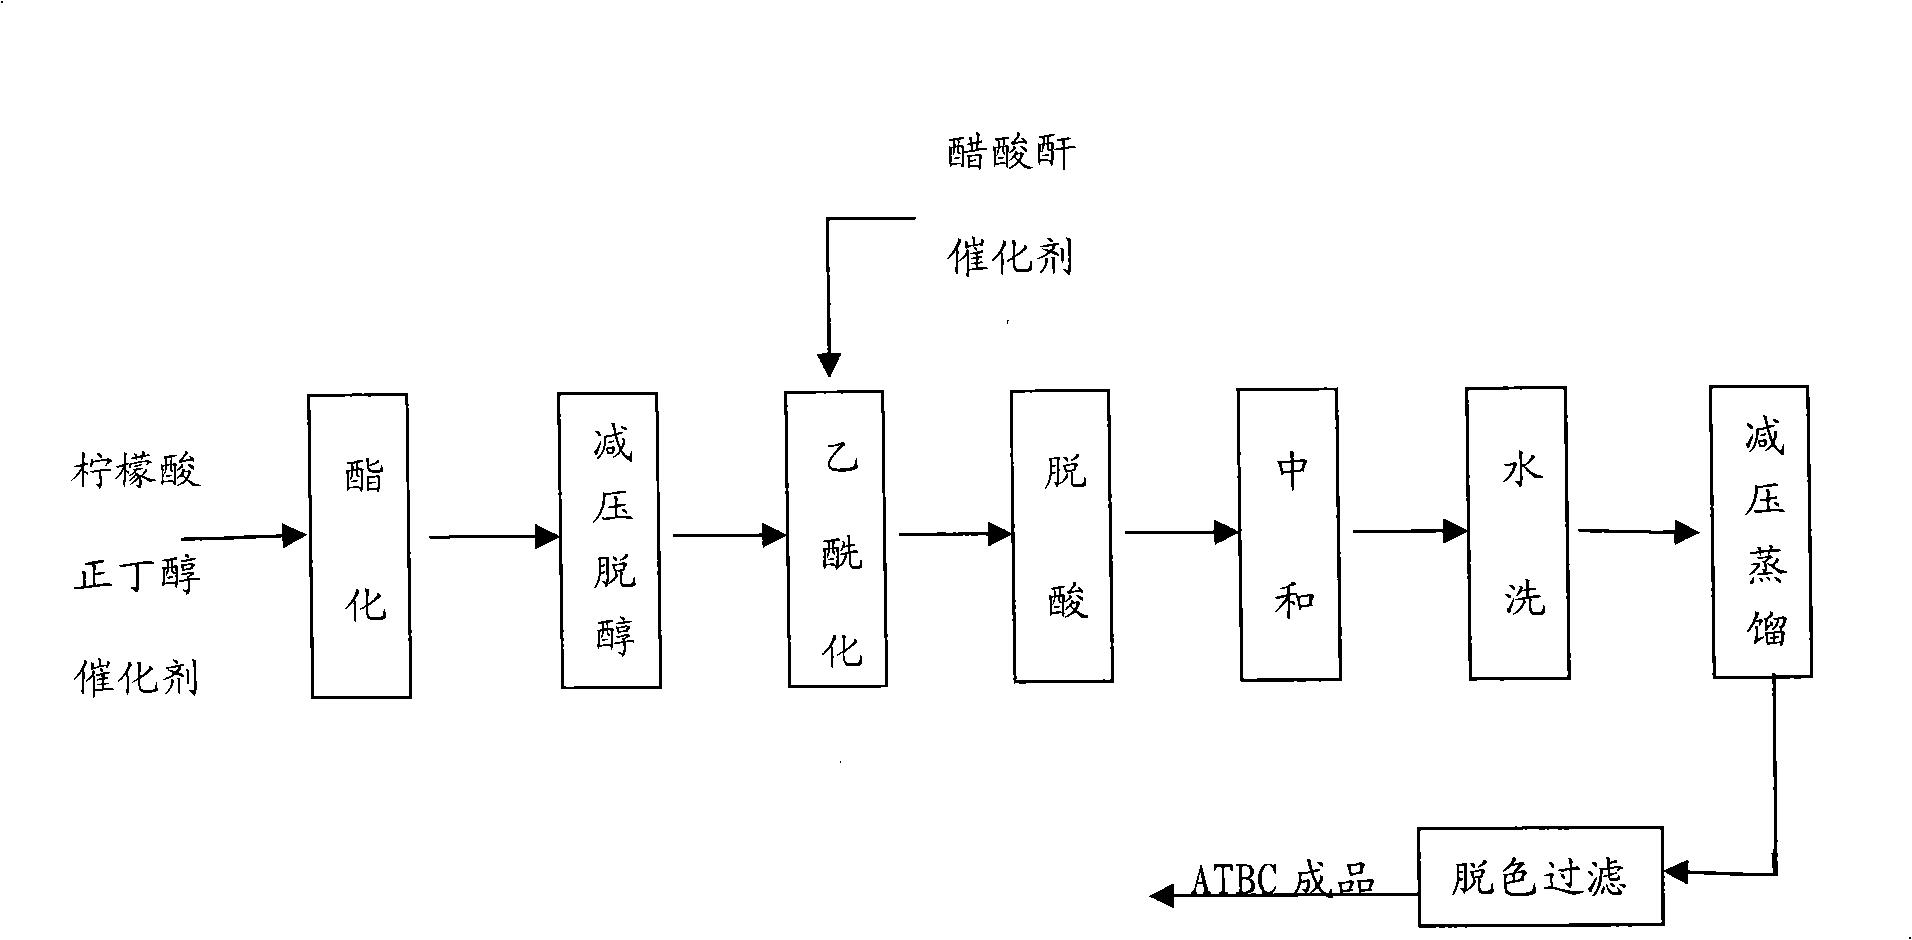 Process for producing acet-tributyl citrate